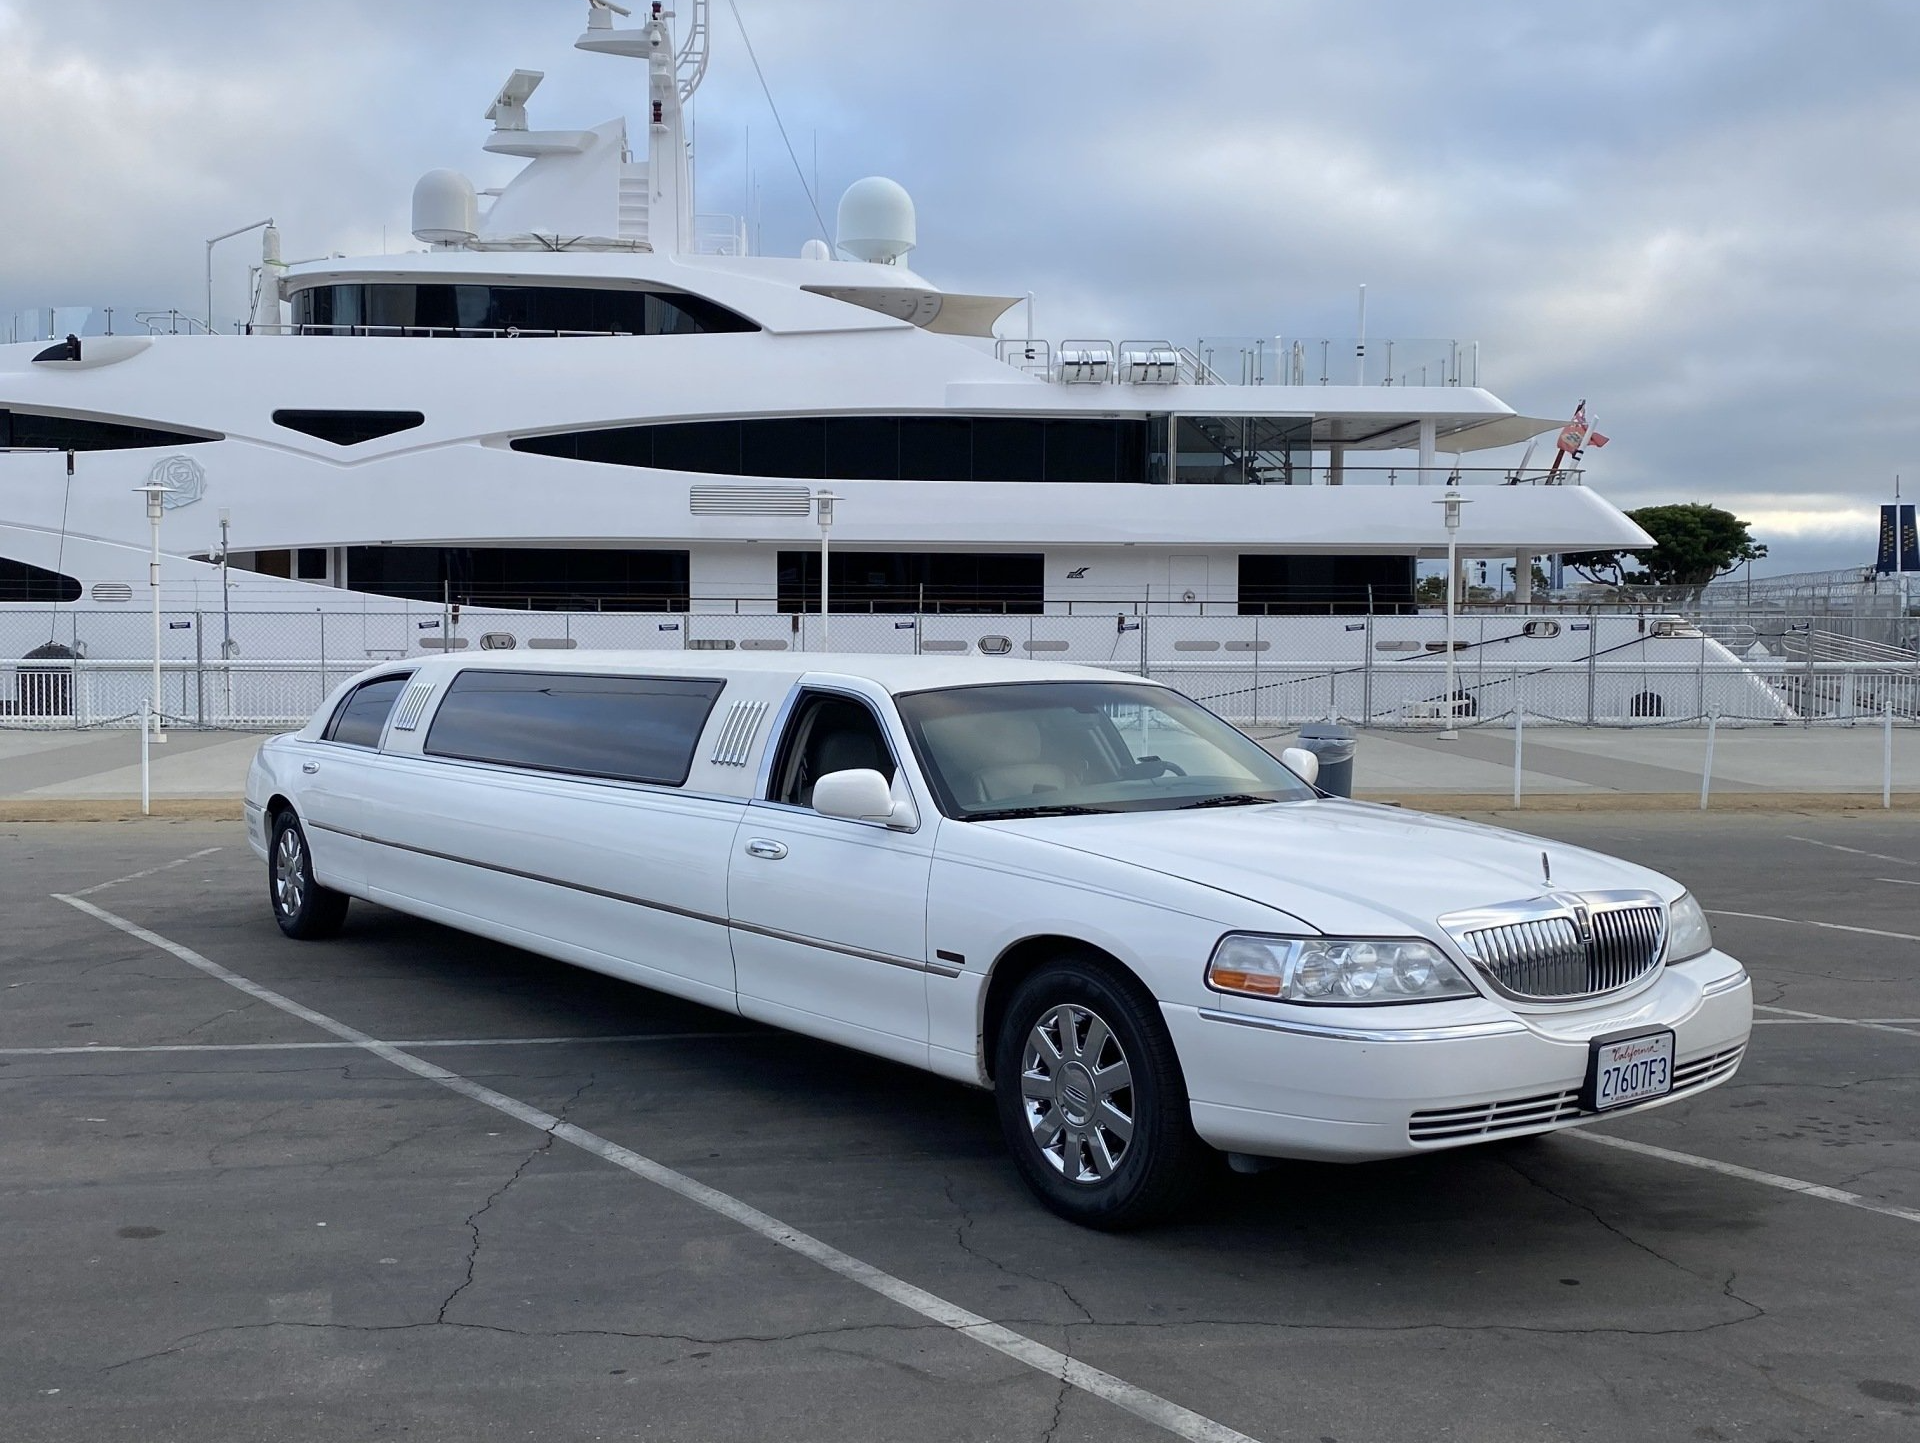 a white limousine is parked in front of a large white yacht .